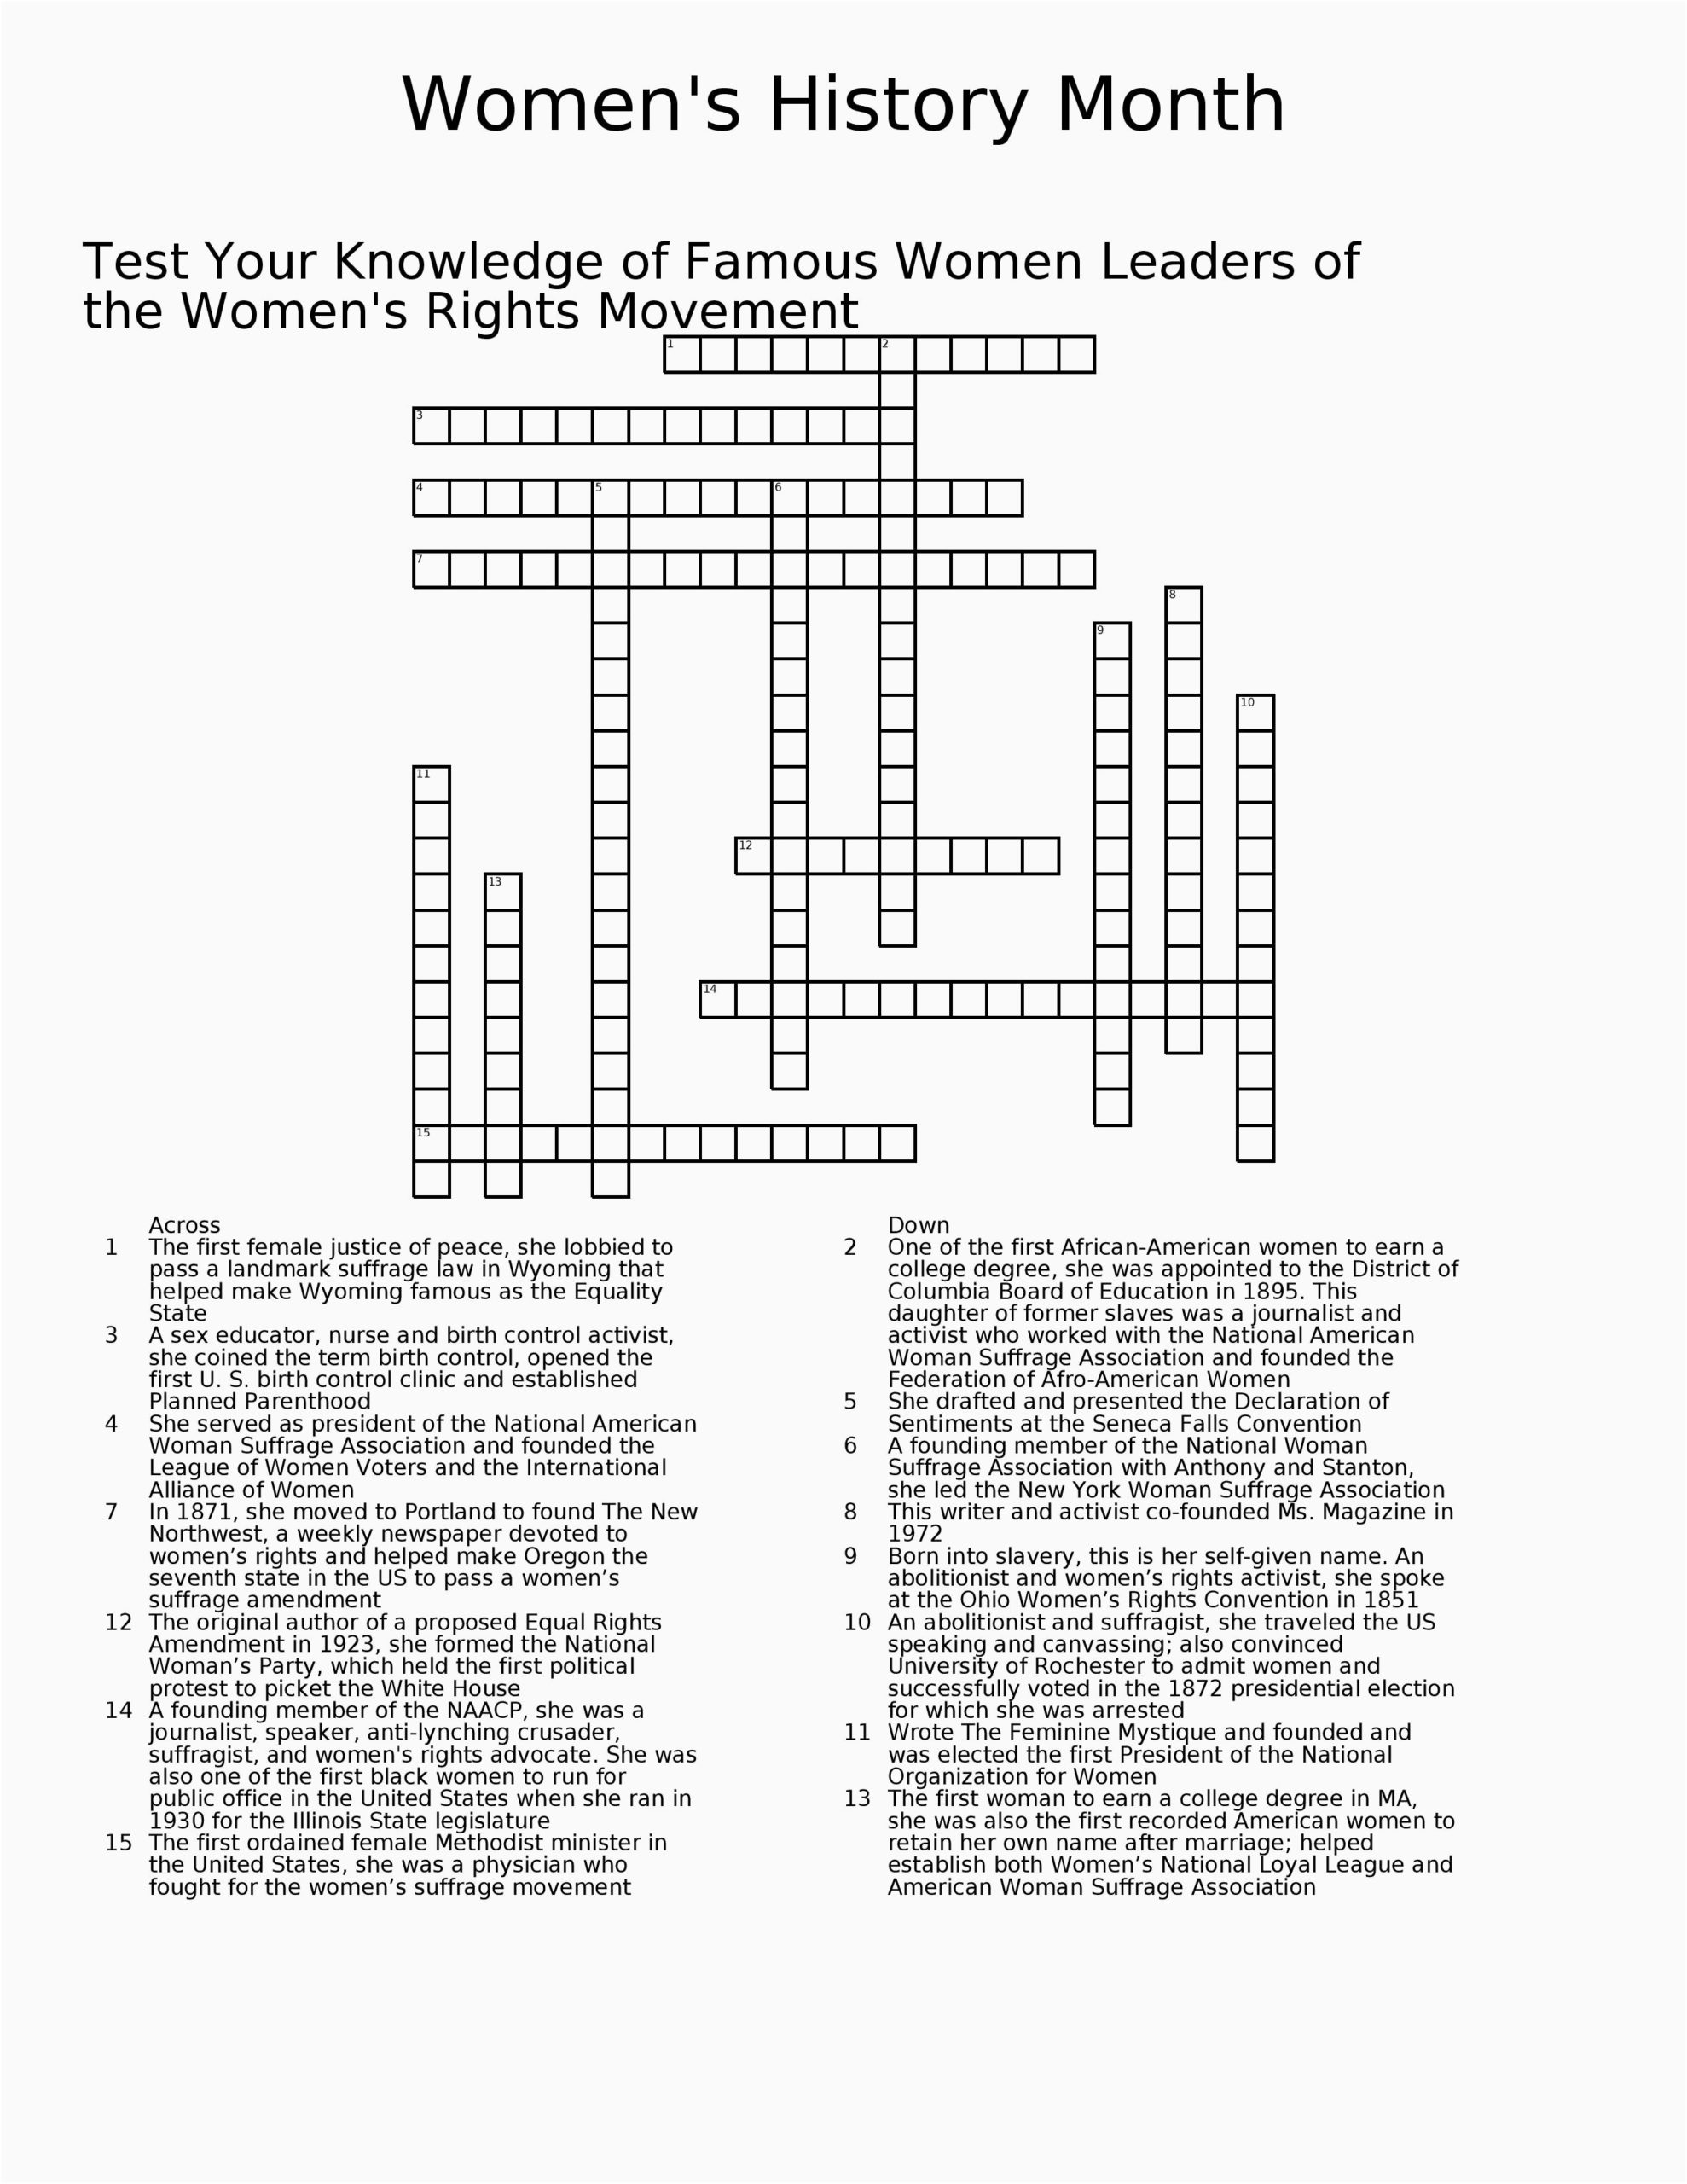 Black History Month Crossword Puzzle For Kids Printable